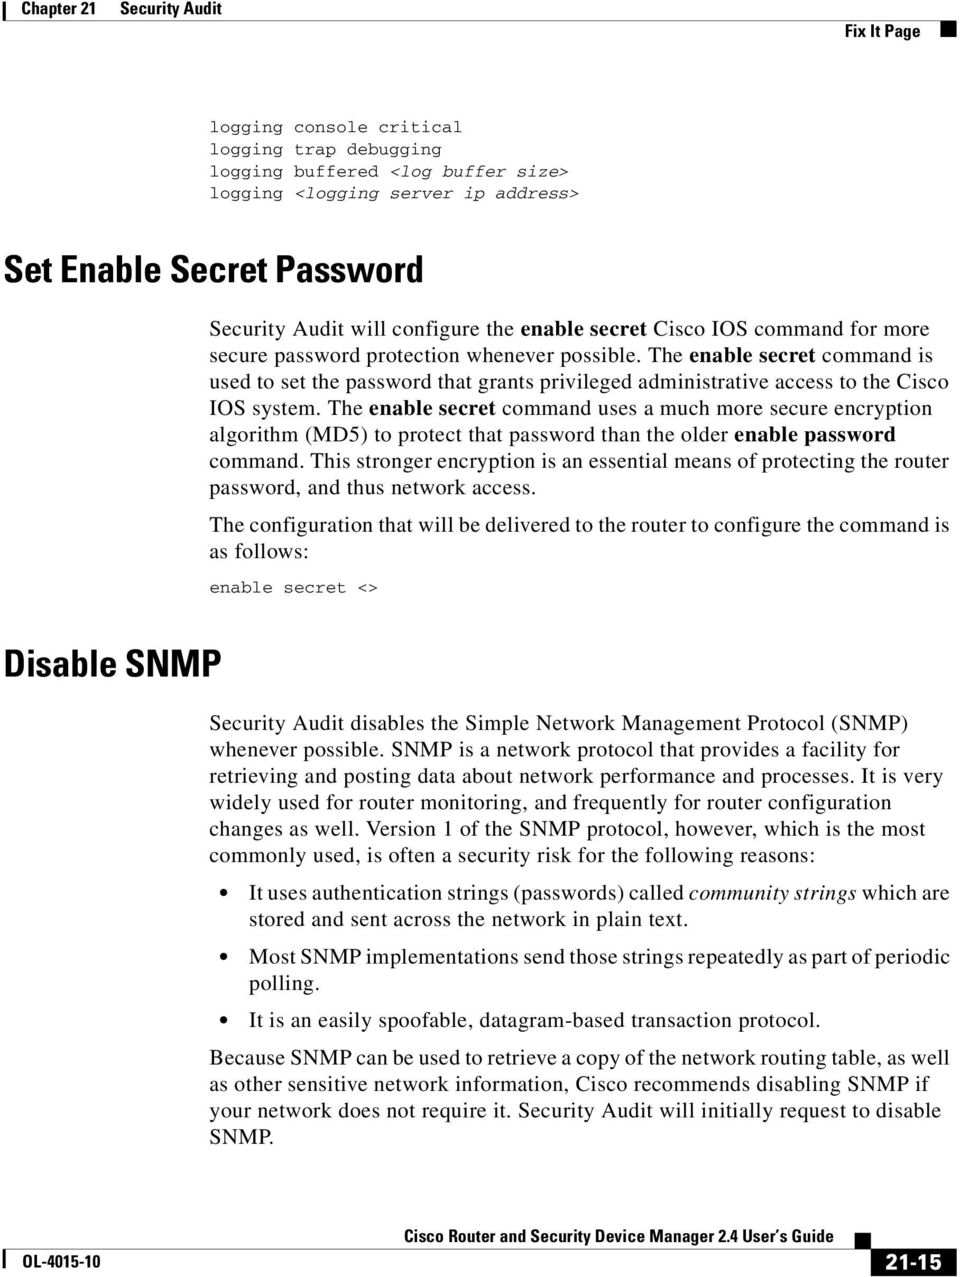 The enable secret command is used to set the password that grants privileged administrative access to the Cisco IOS system.